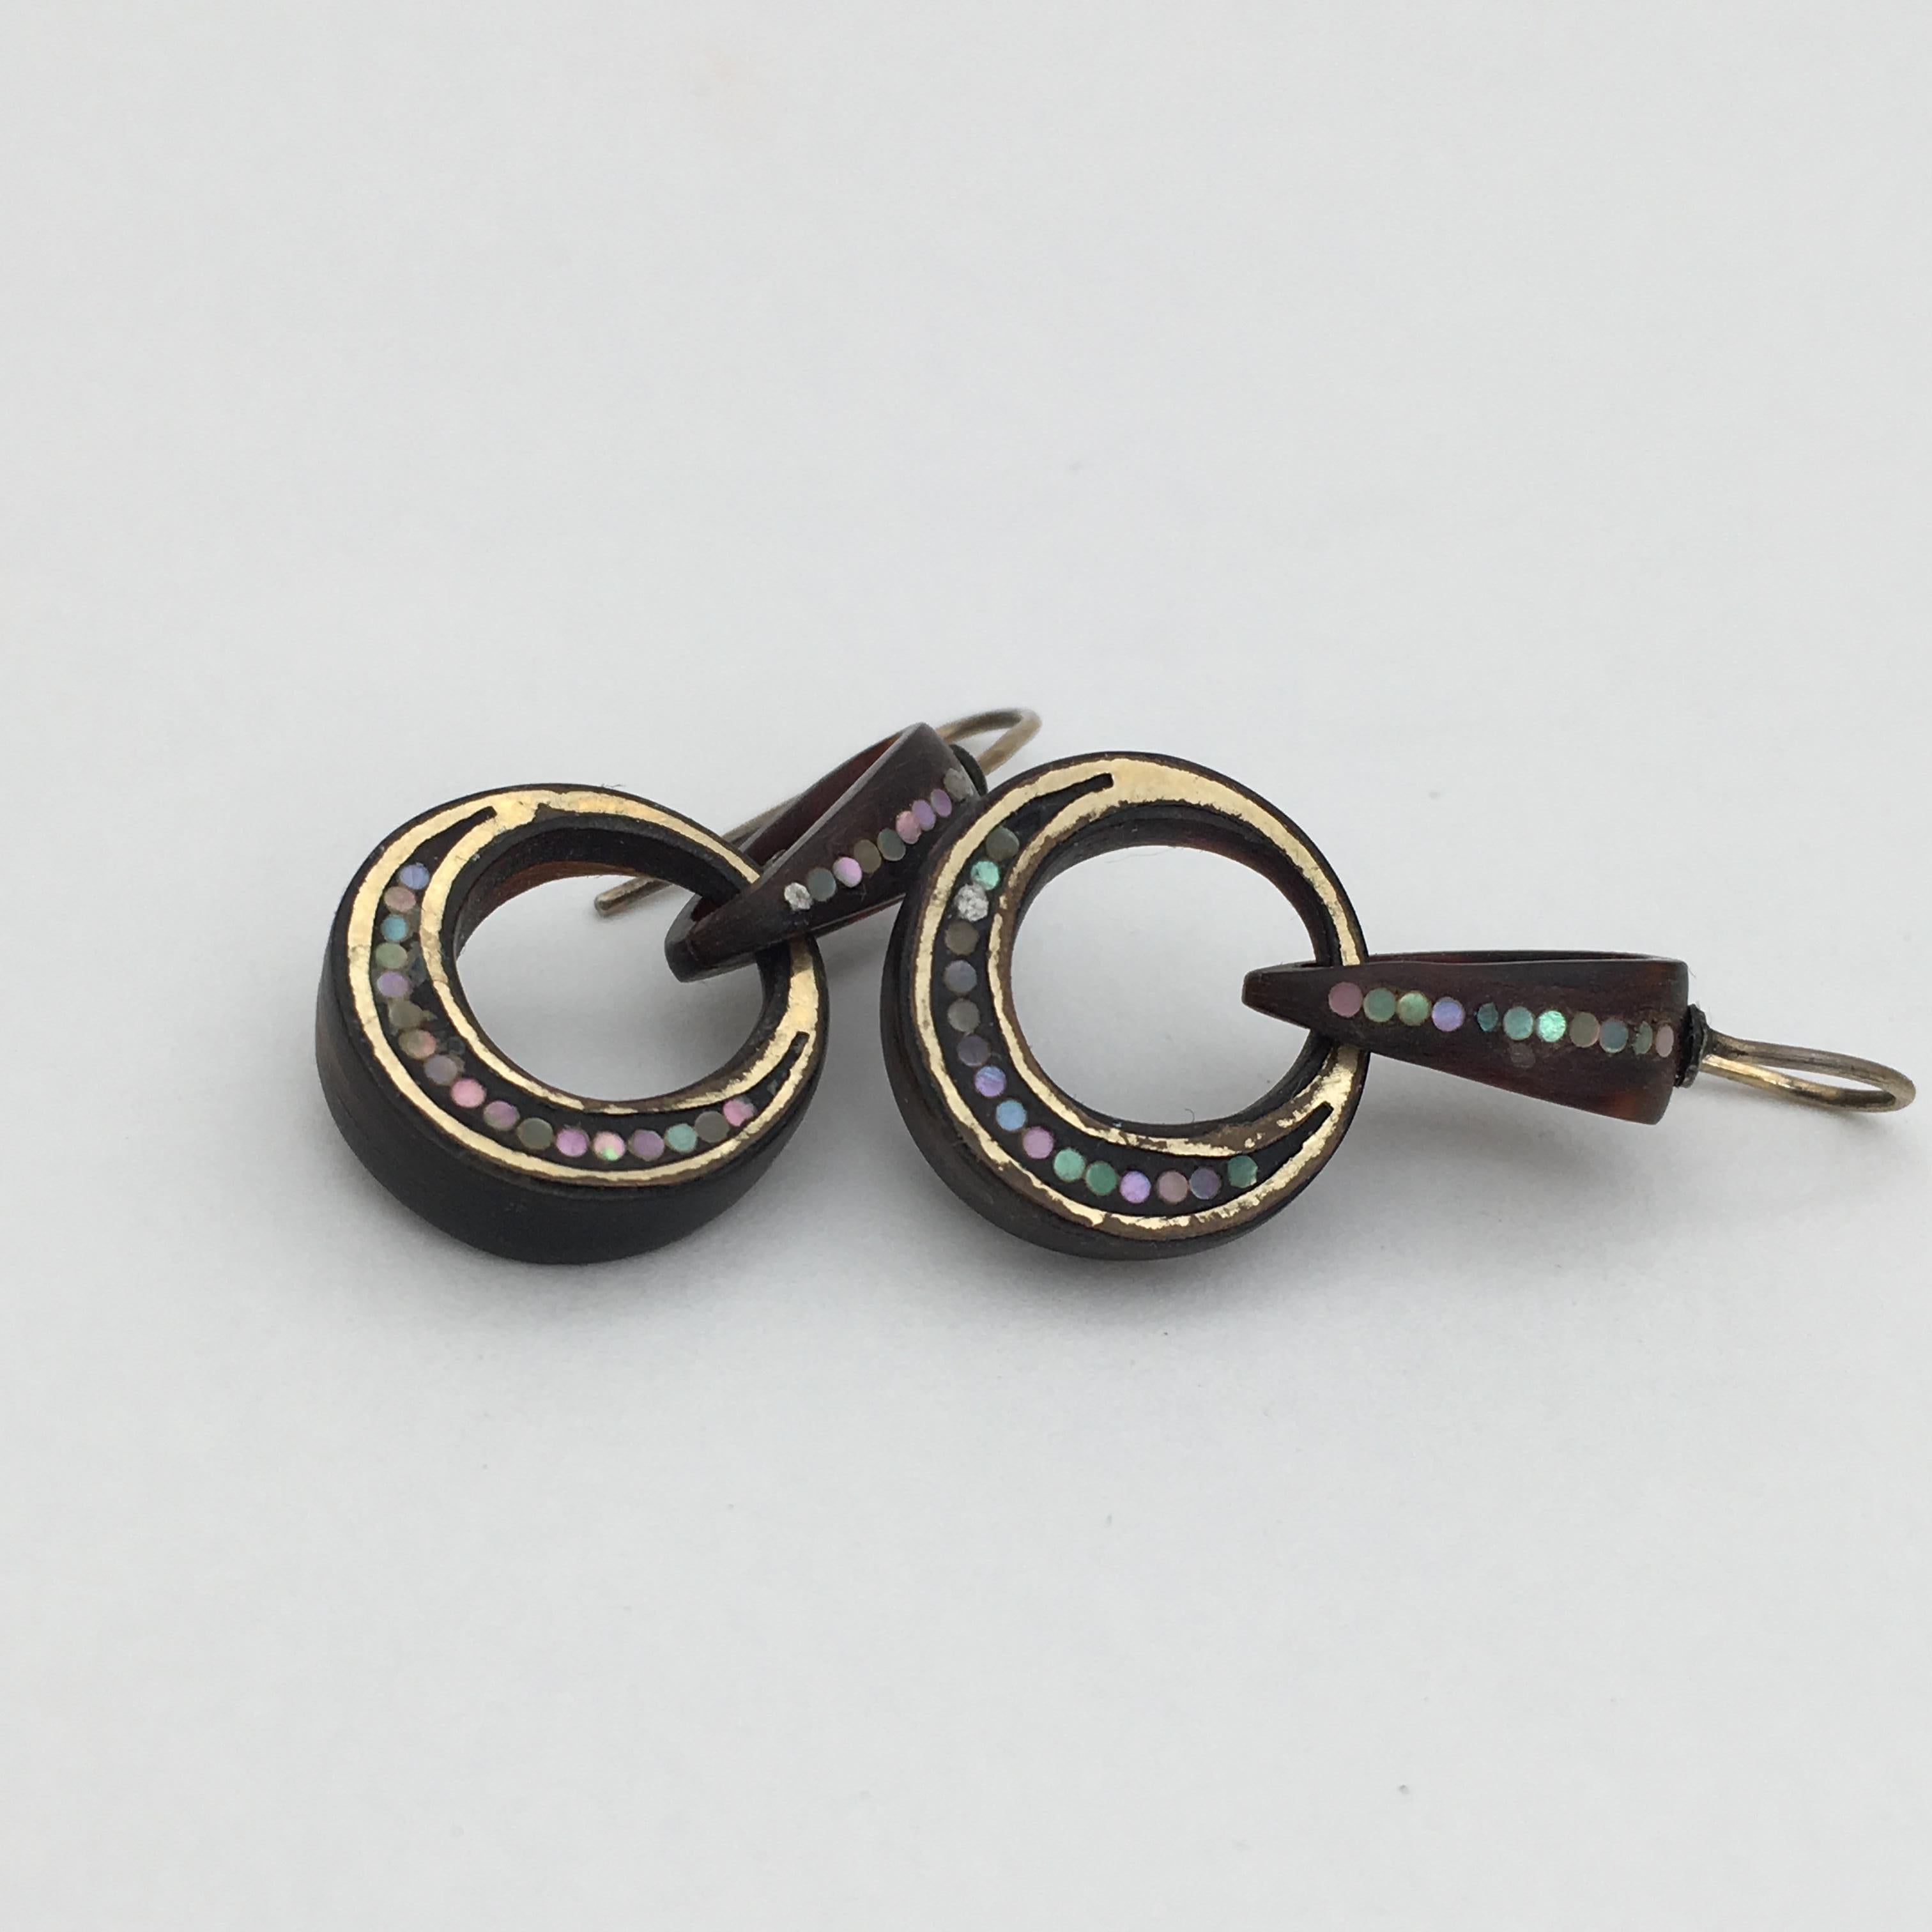 Antique Pique Drop Earrings Tortoiseshell Mother-of-Pearl Crescent Moon Hoops In Good Condition For Sale In London, GB